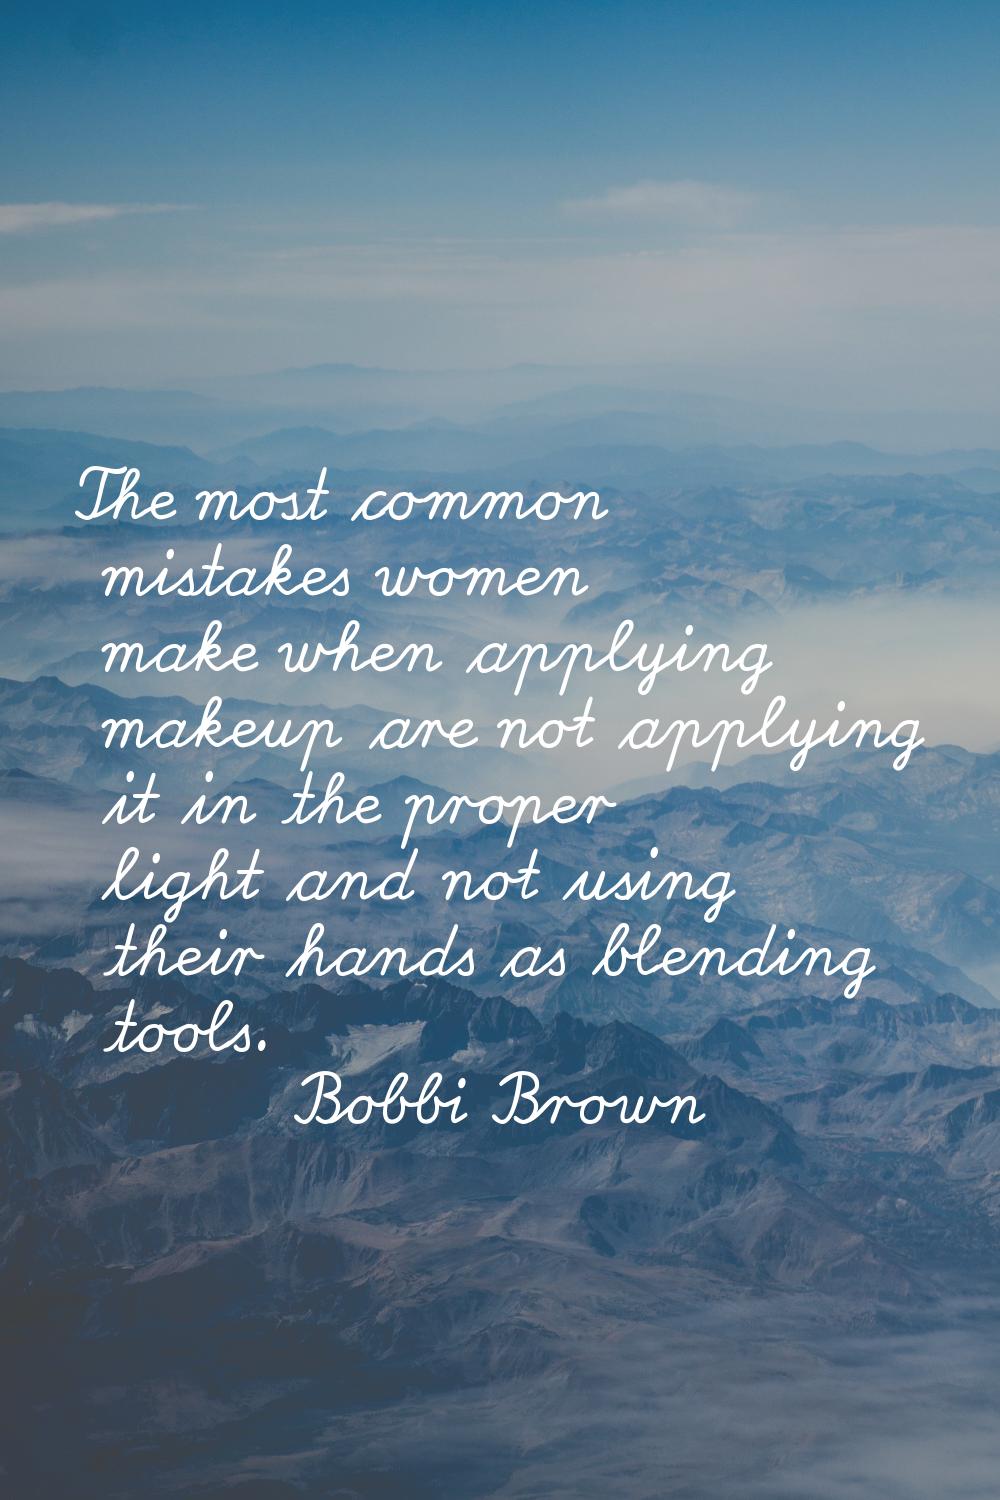 The most common mistakes women make when applying makeup are not applying it in the proper light an